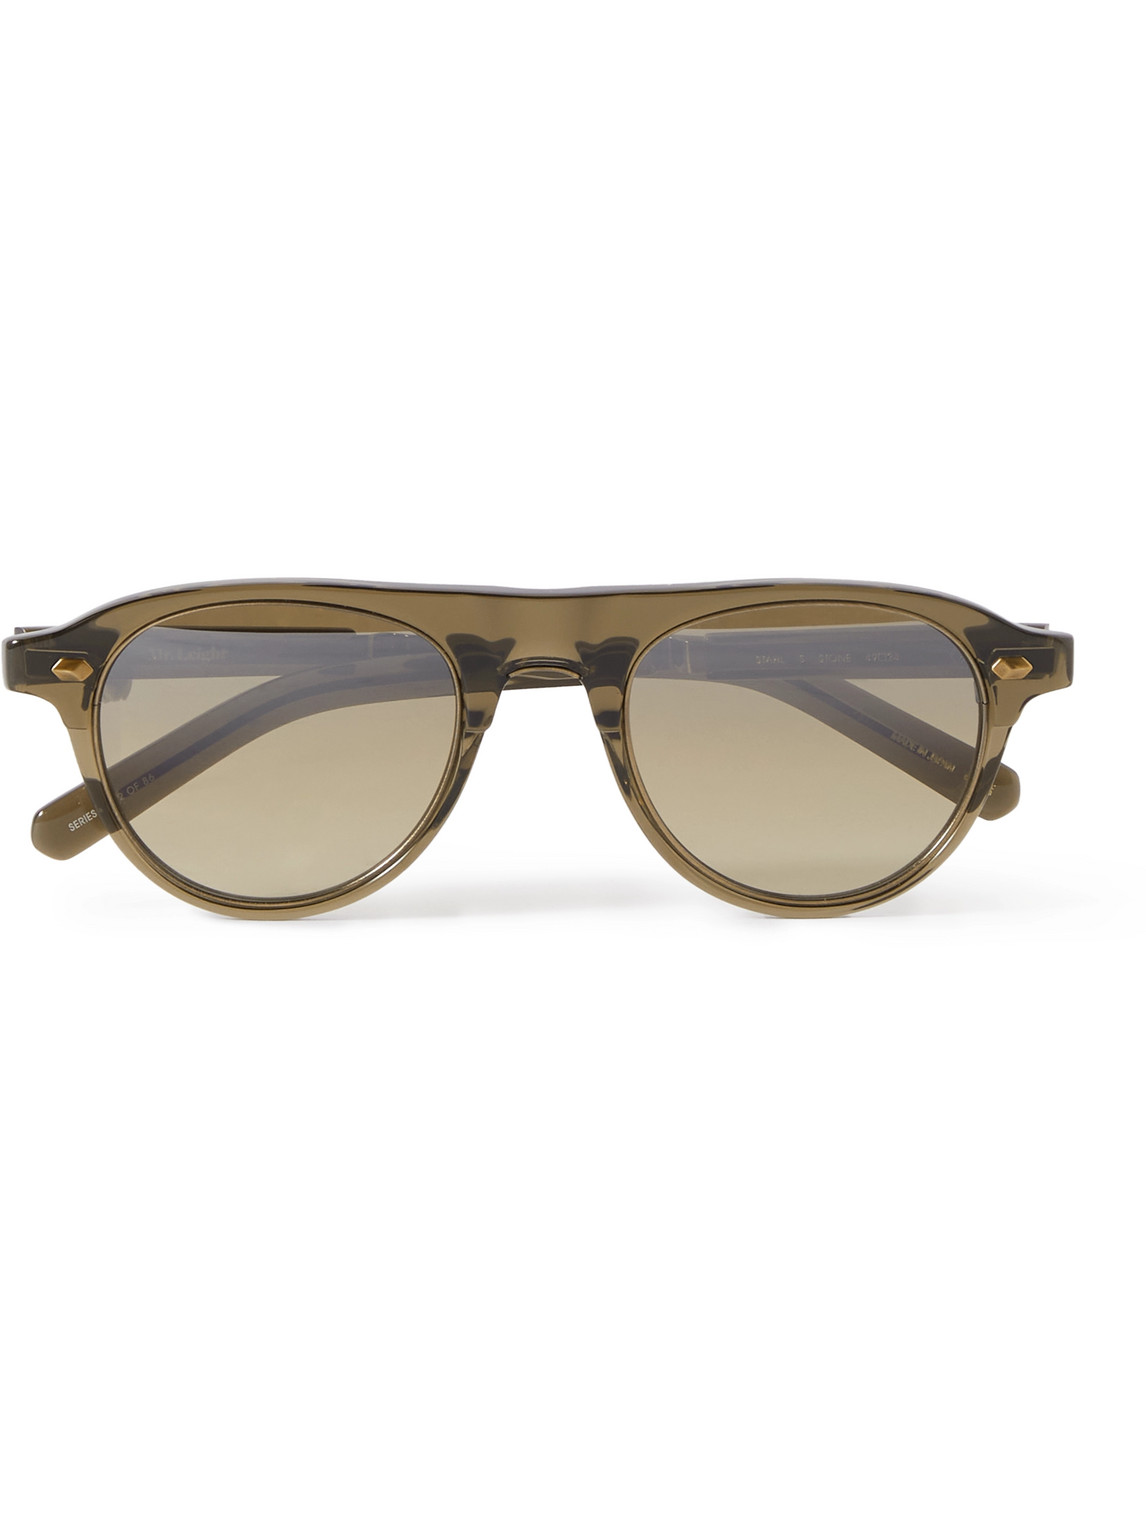 Mr Leight Stahl Aviator-style Acetate Sunglasses In Brown